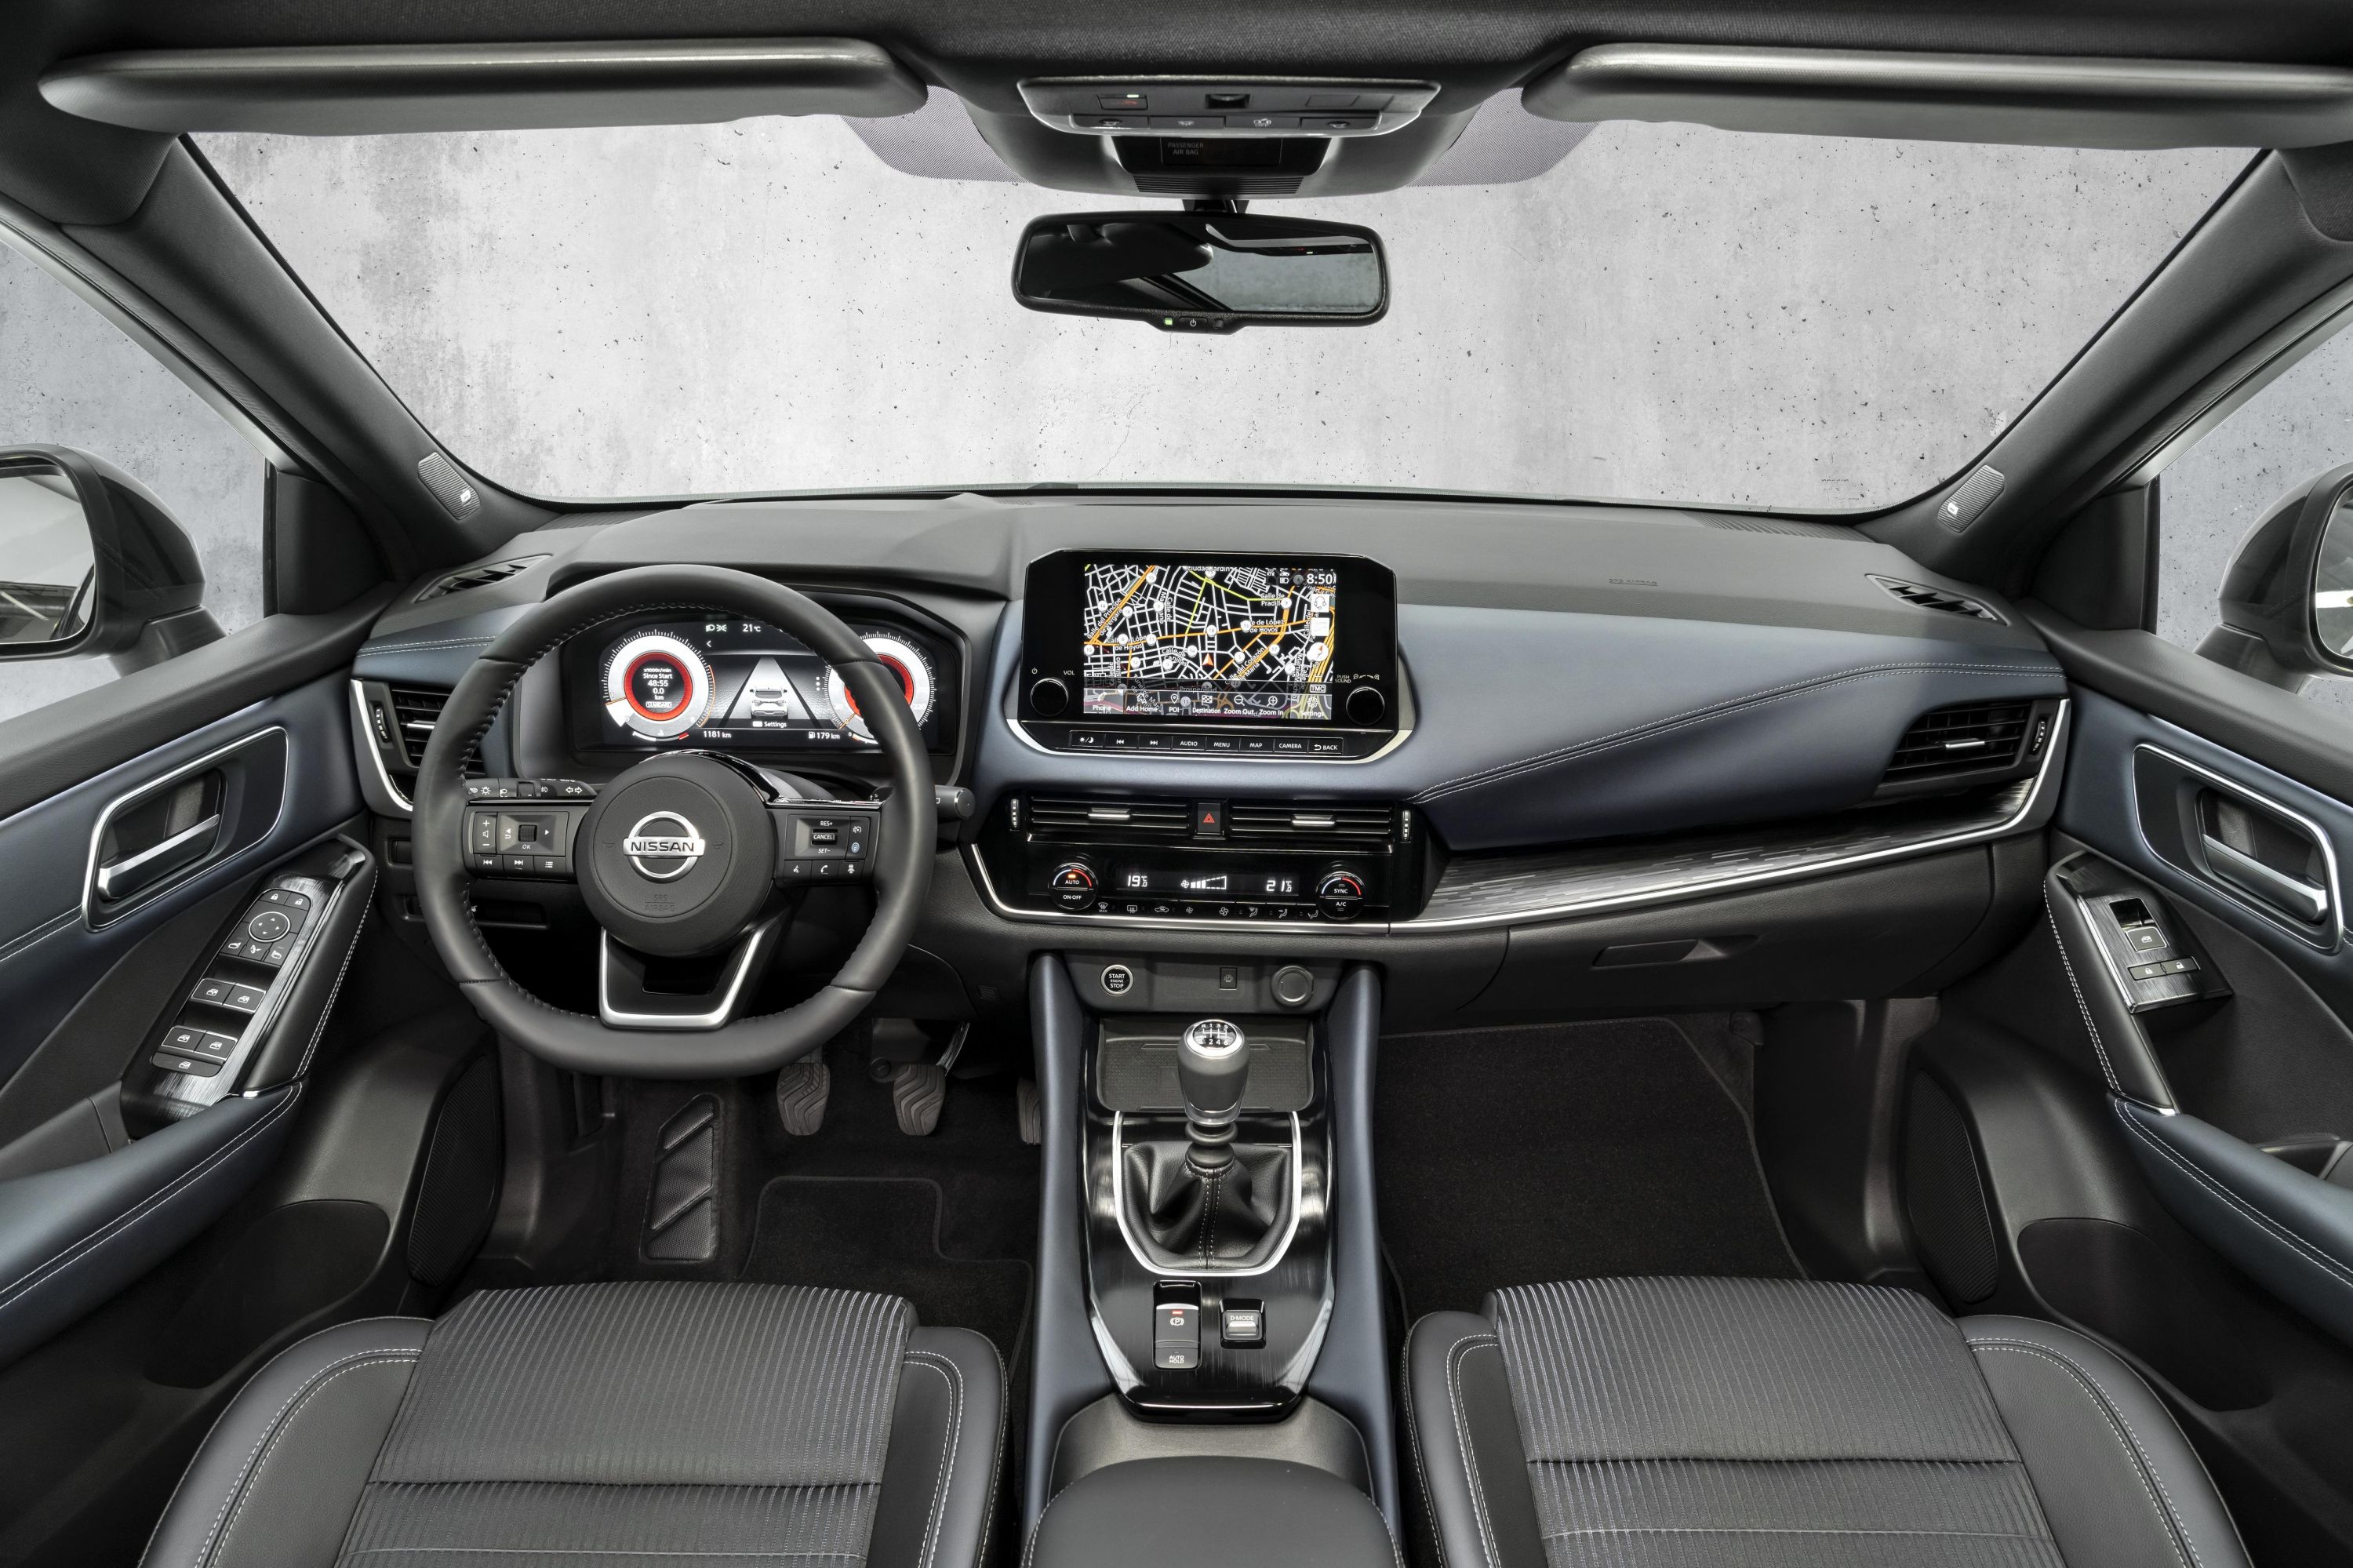 Nissan Qashqai Interior, Technology and Practicality